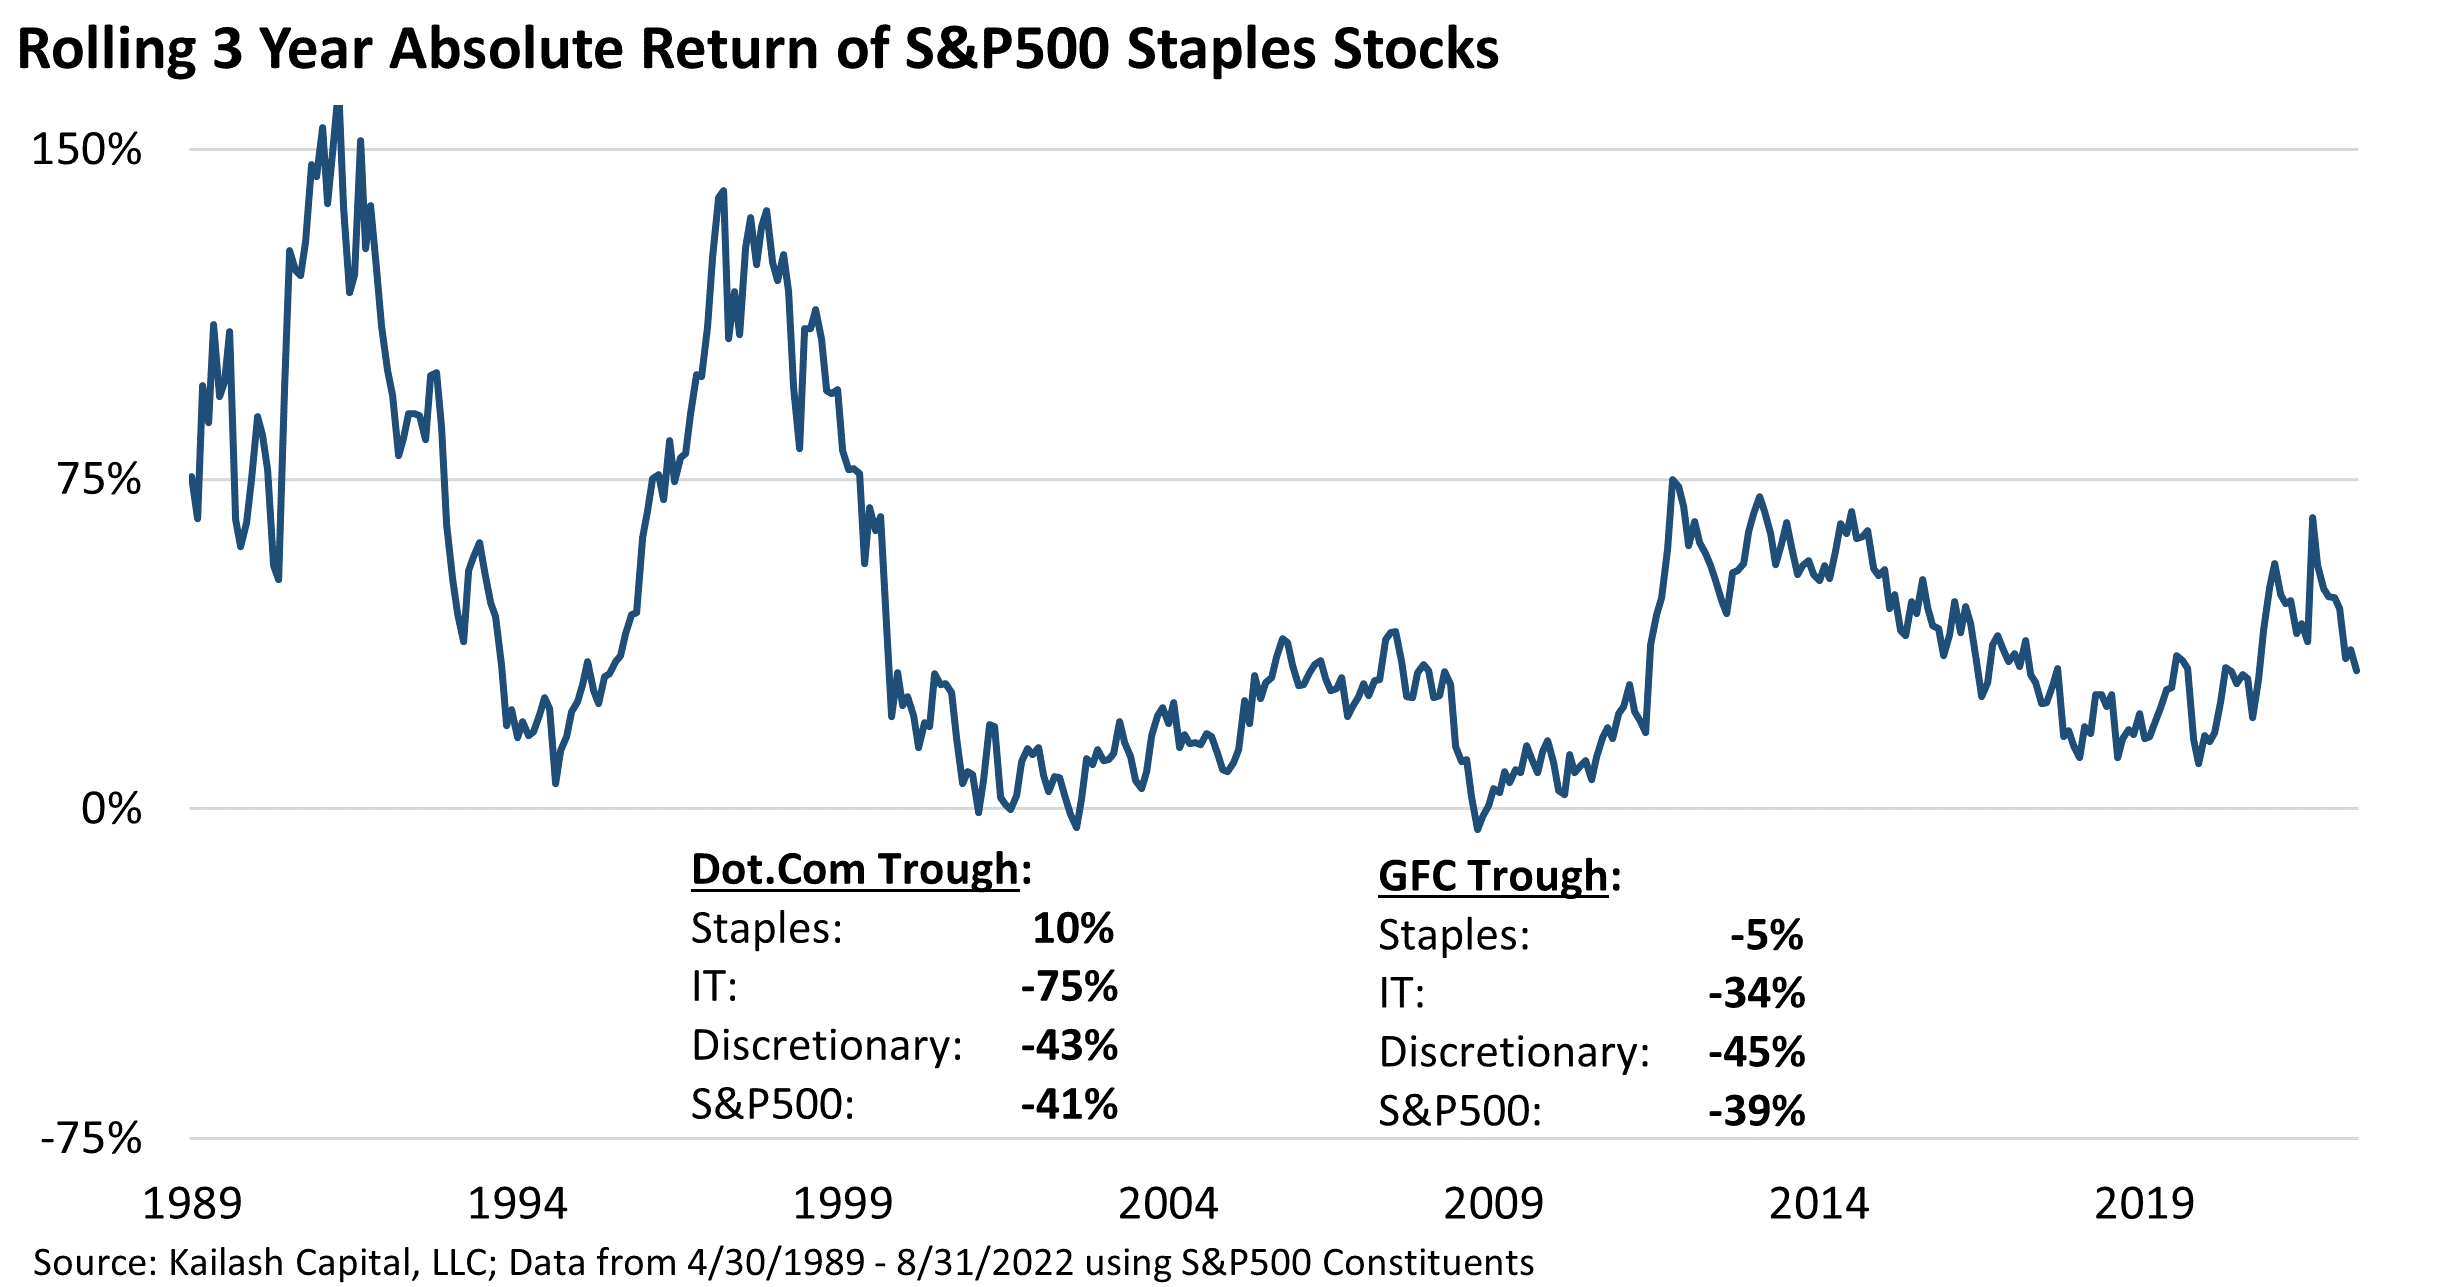 Rolling 3 Year Absolute Return of S&P500 Staples Stock